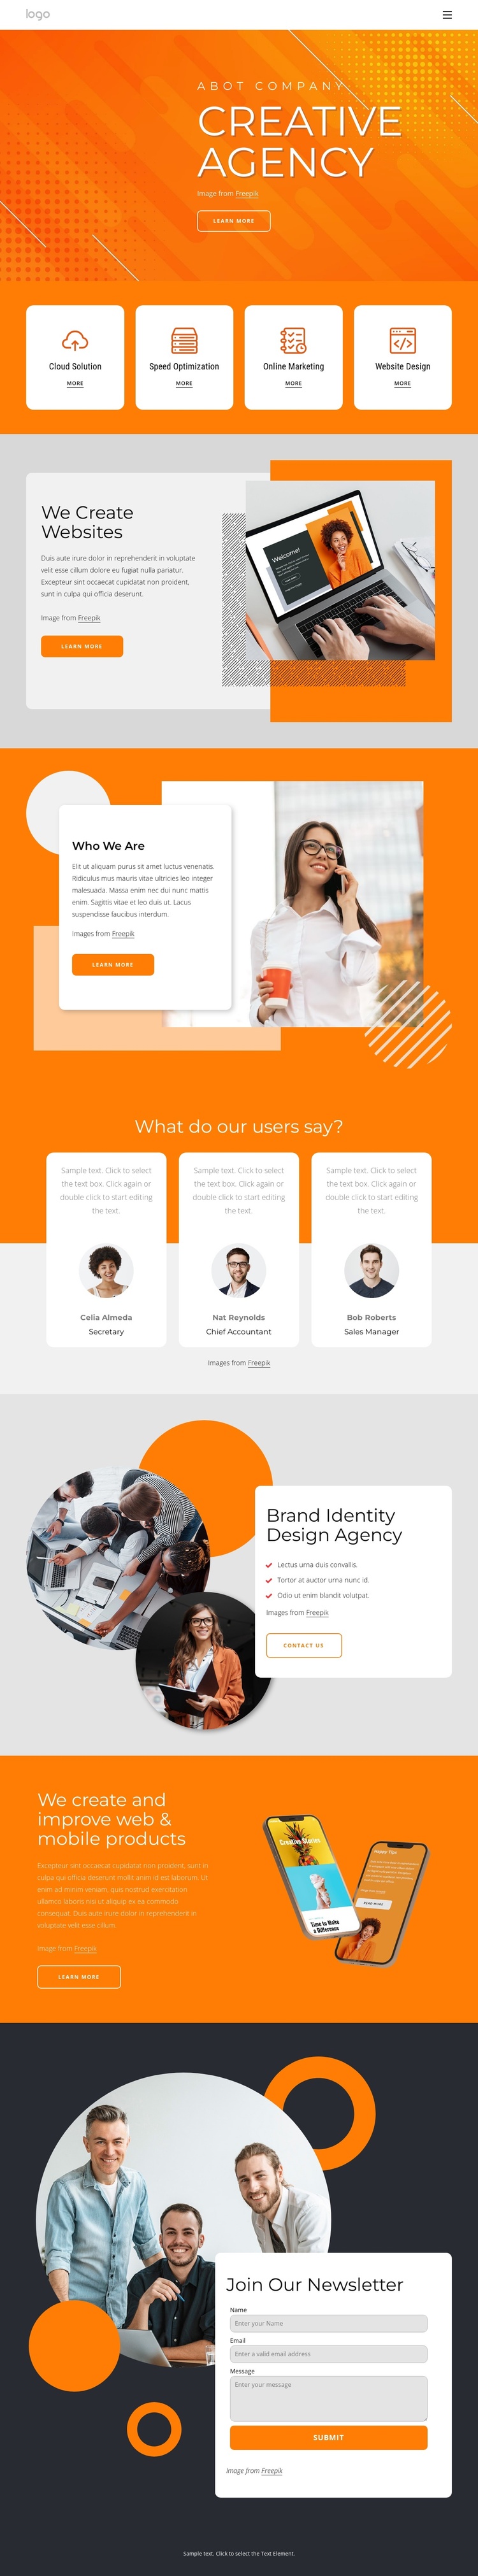 The creative agency for your next big thing Joomla Template